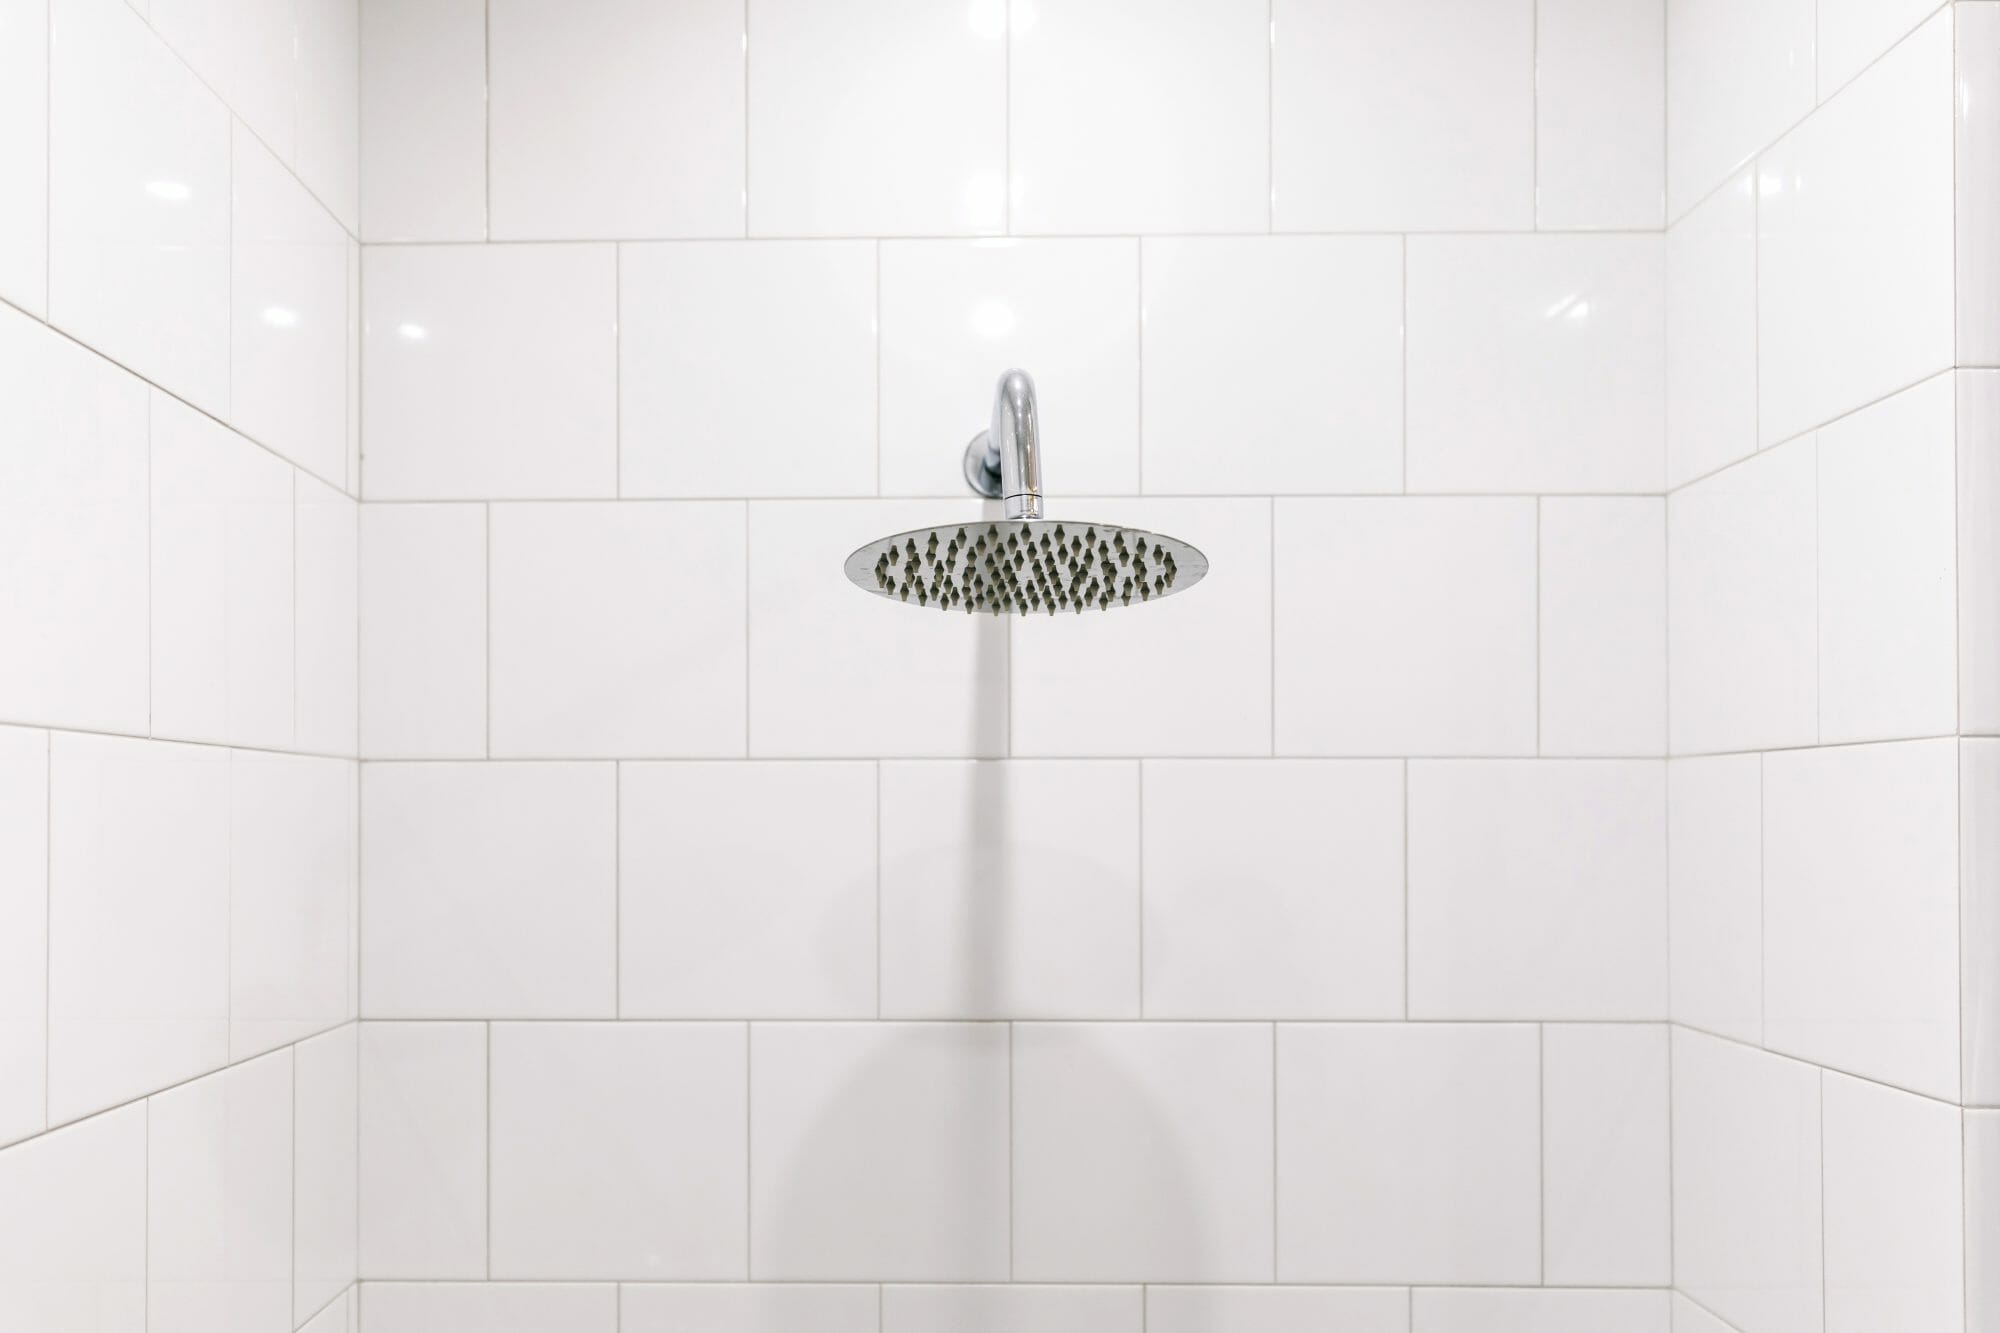 What are the benefits of having a tiled shower?